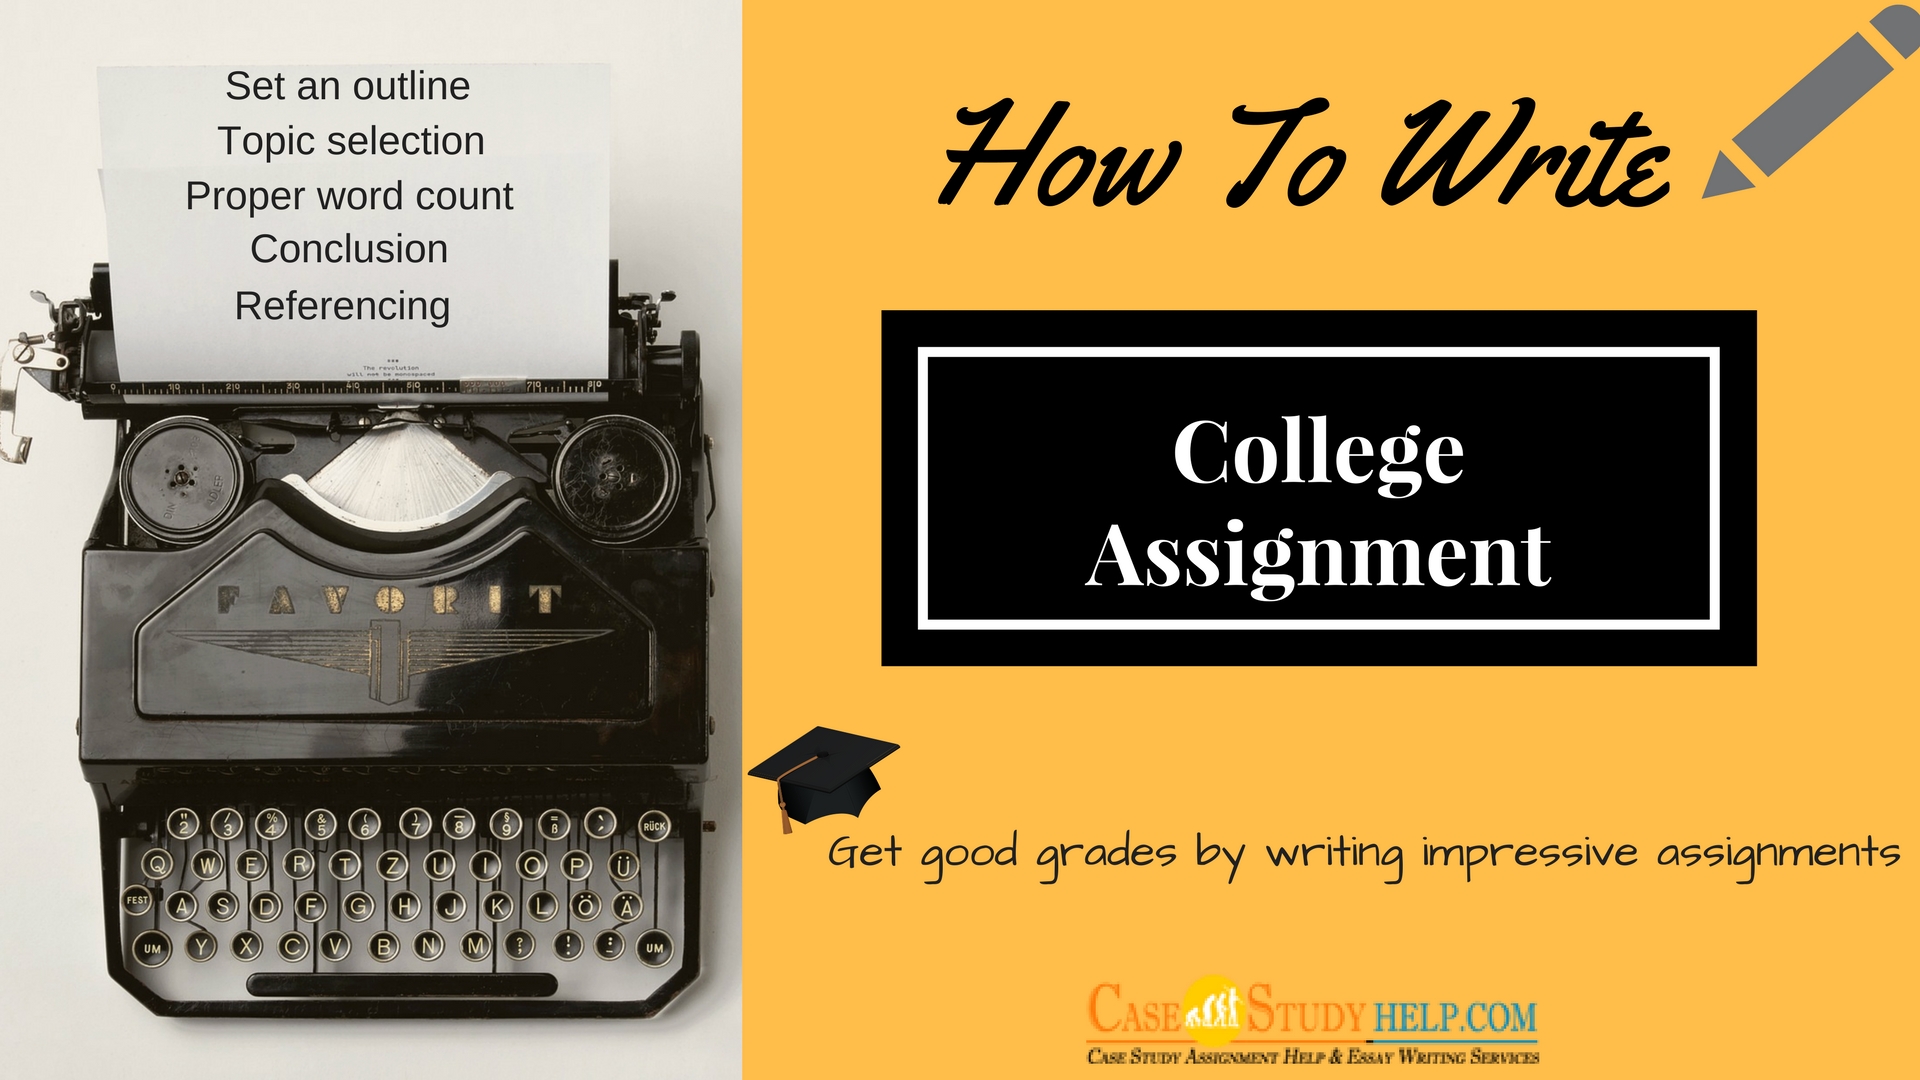 How to make assignment